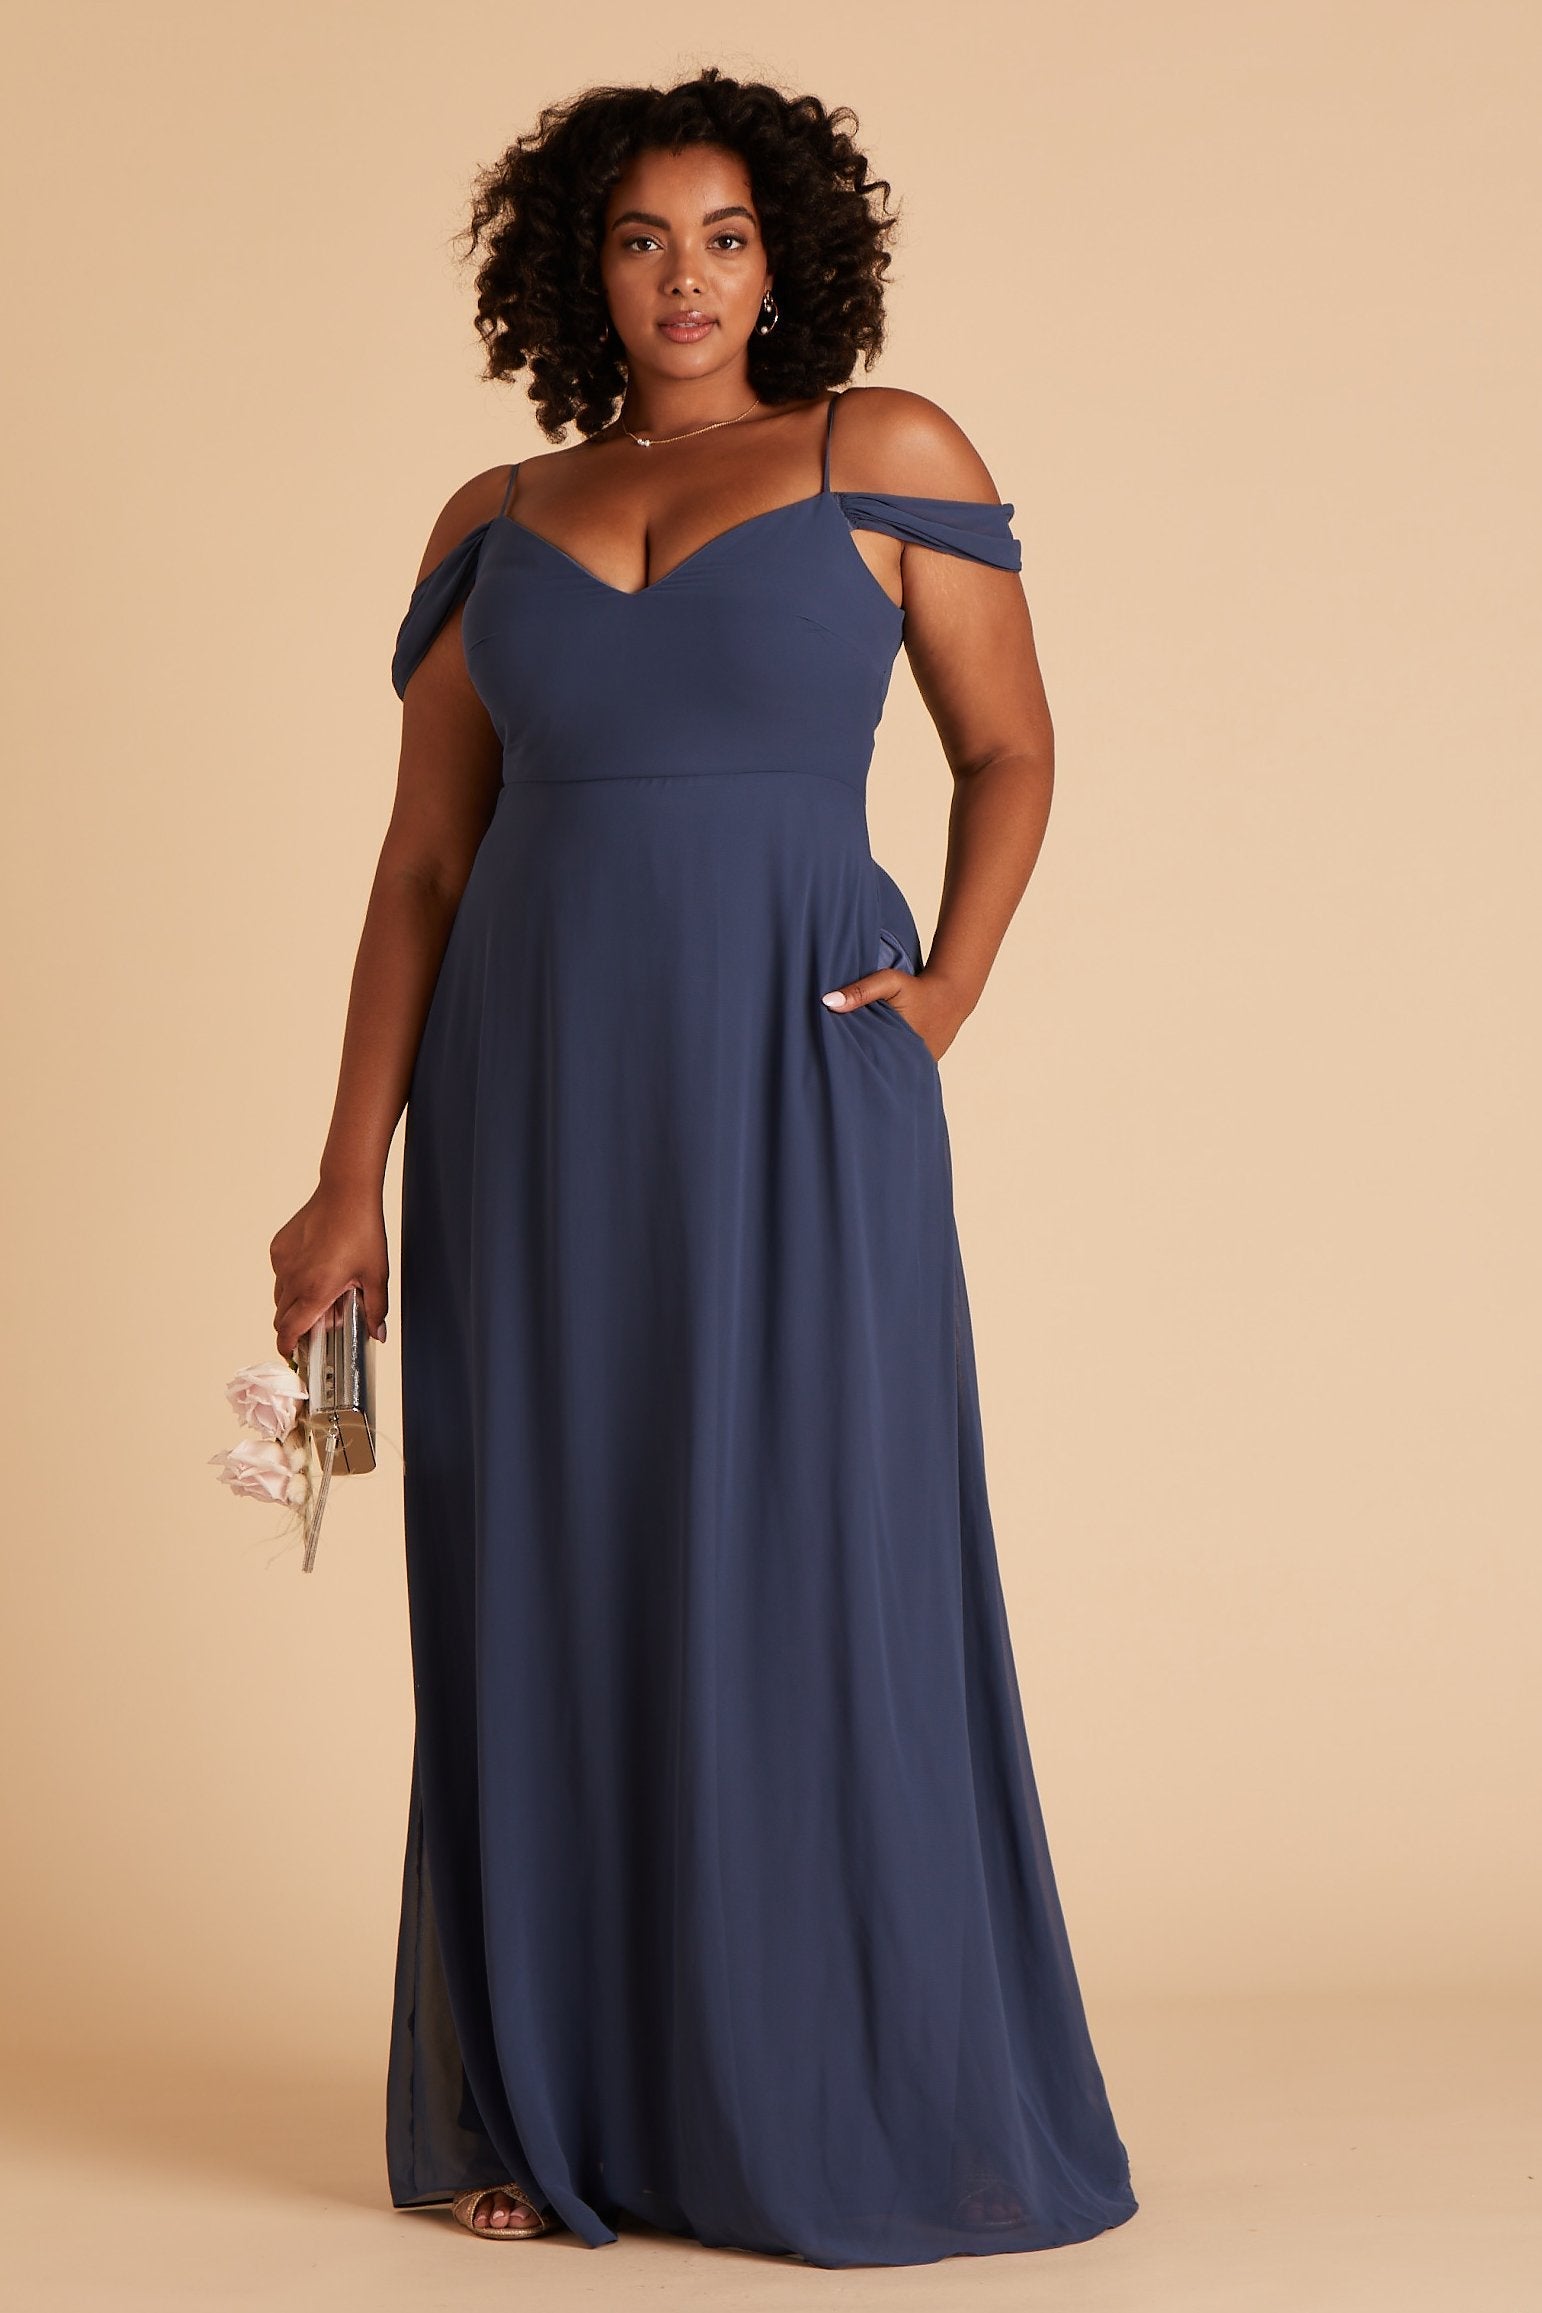 Devin convertible plus size bridesmaids dress in slate blue chiffon by Birdy Grey, front view with hand in pocket